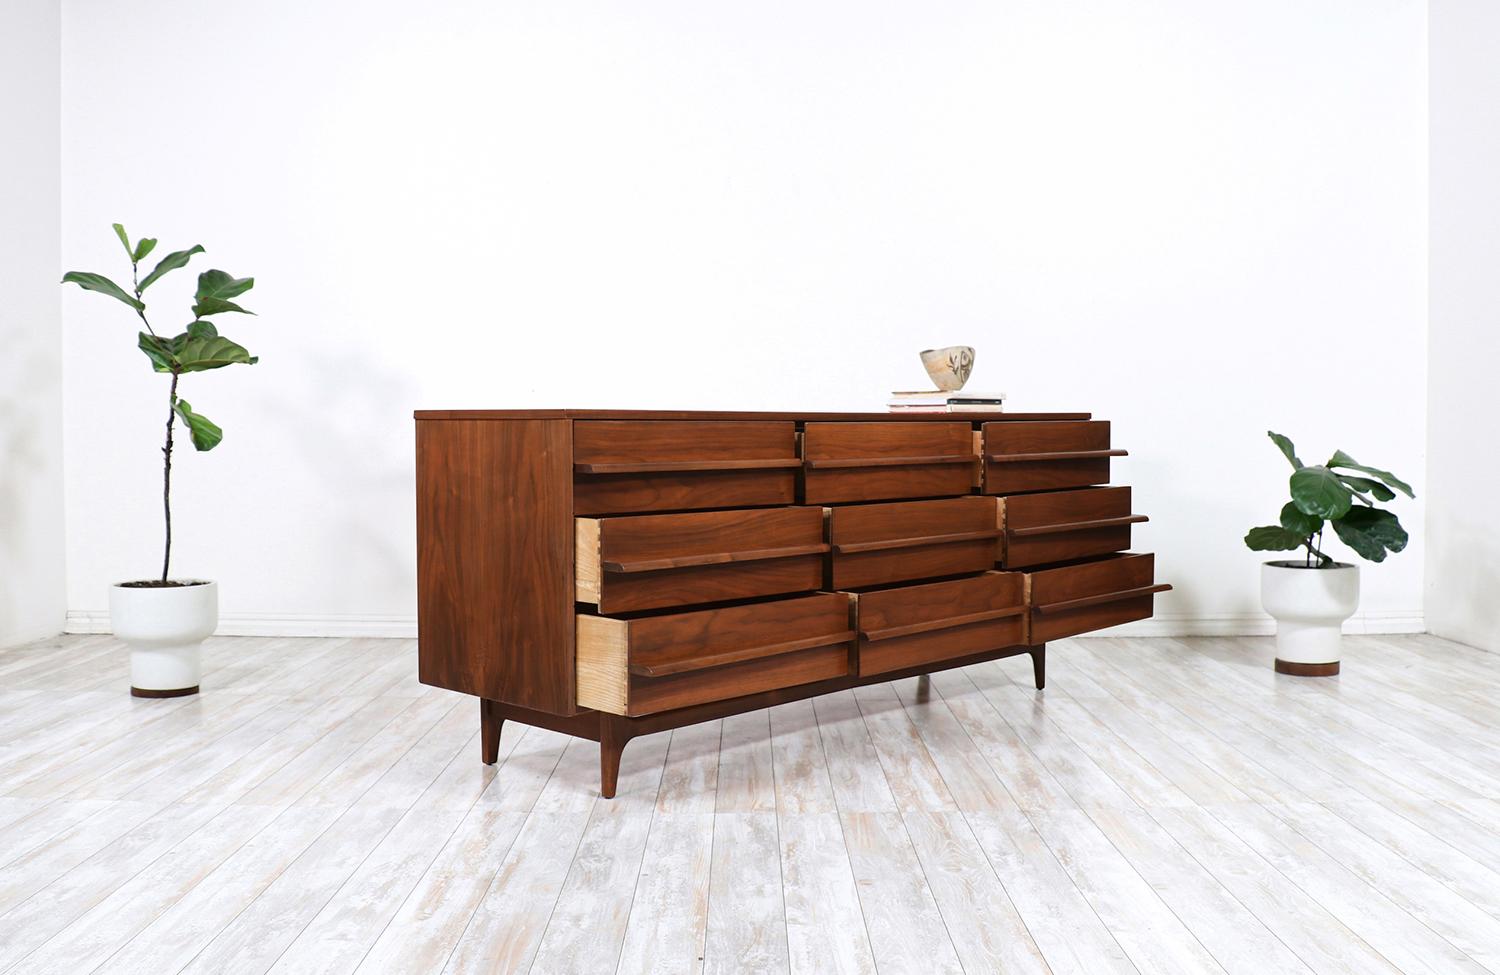 American Mid-Century Modern Curved-Front Dresser by Young Furniture Co.